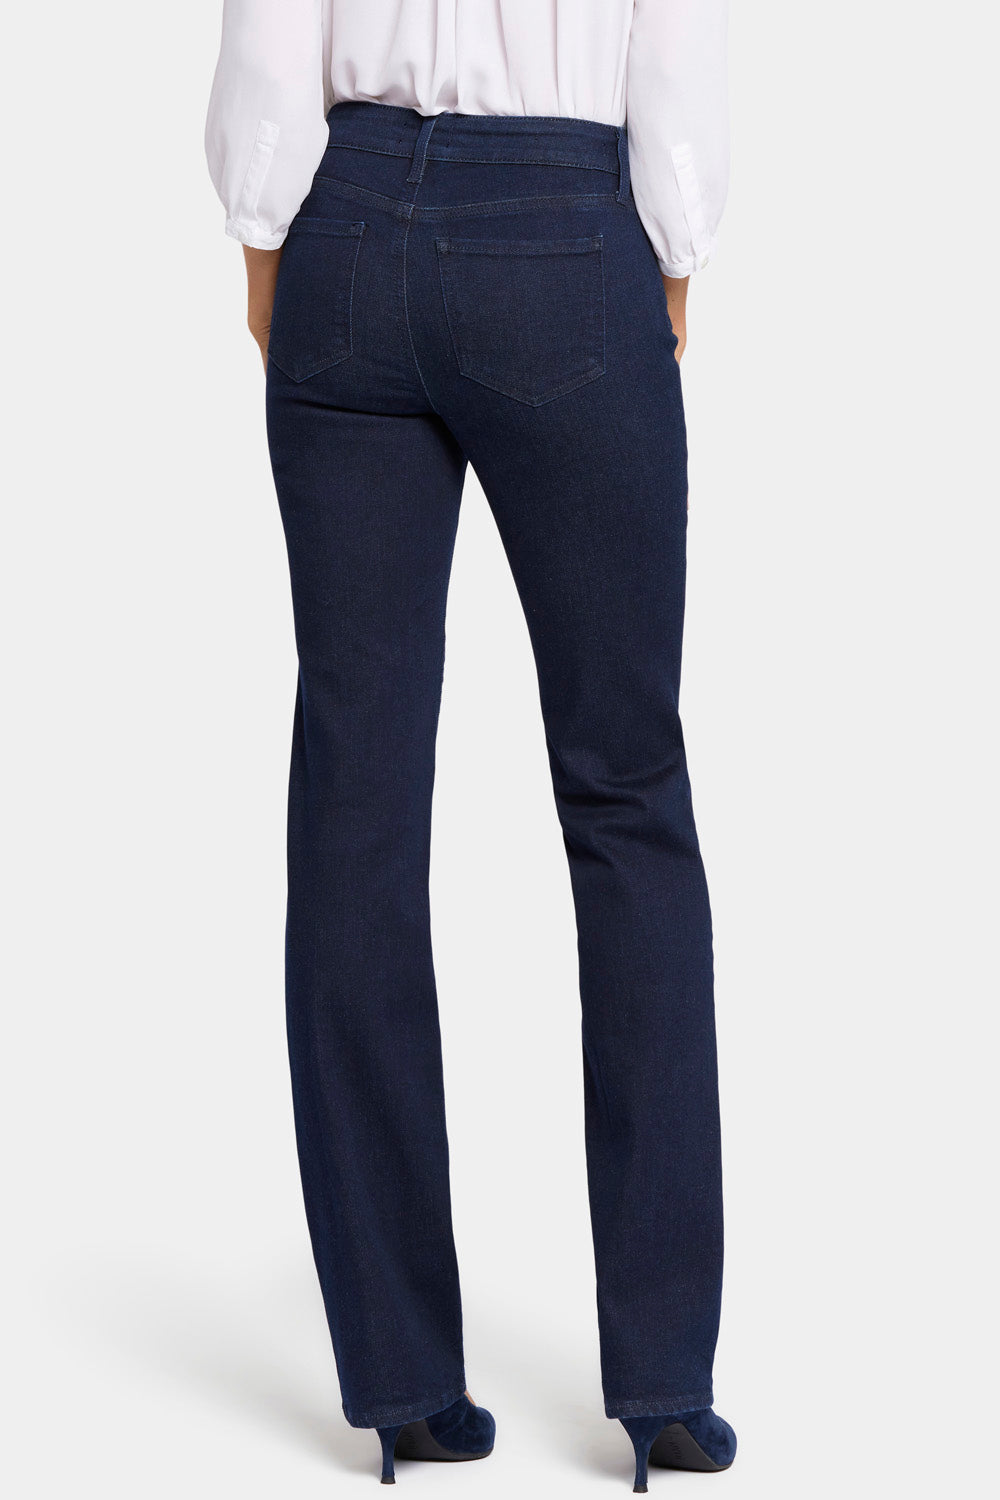 Is this style of jean even an option for a size 16-18 with short legs? :  r/AusFemaleFashion